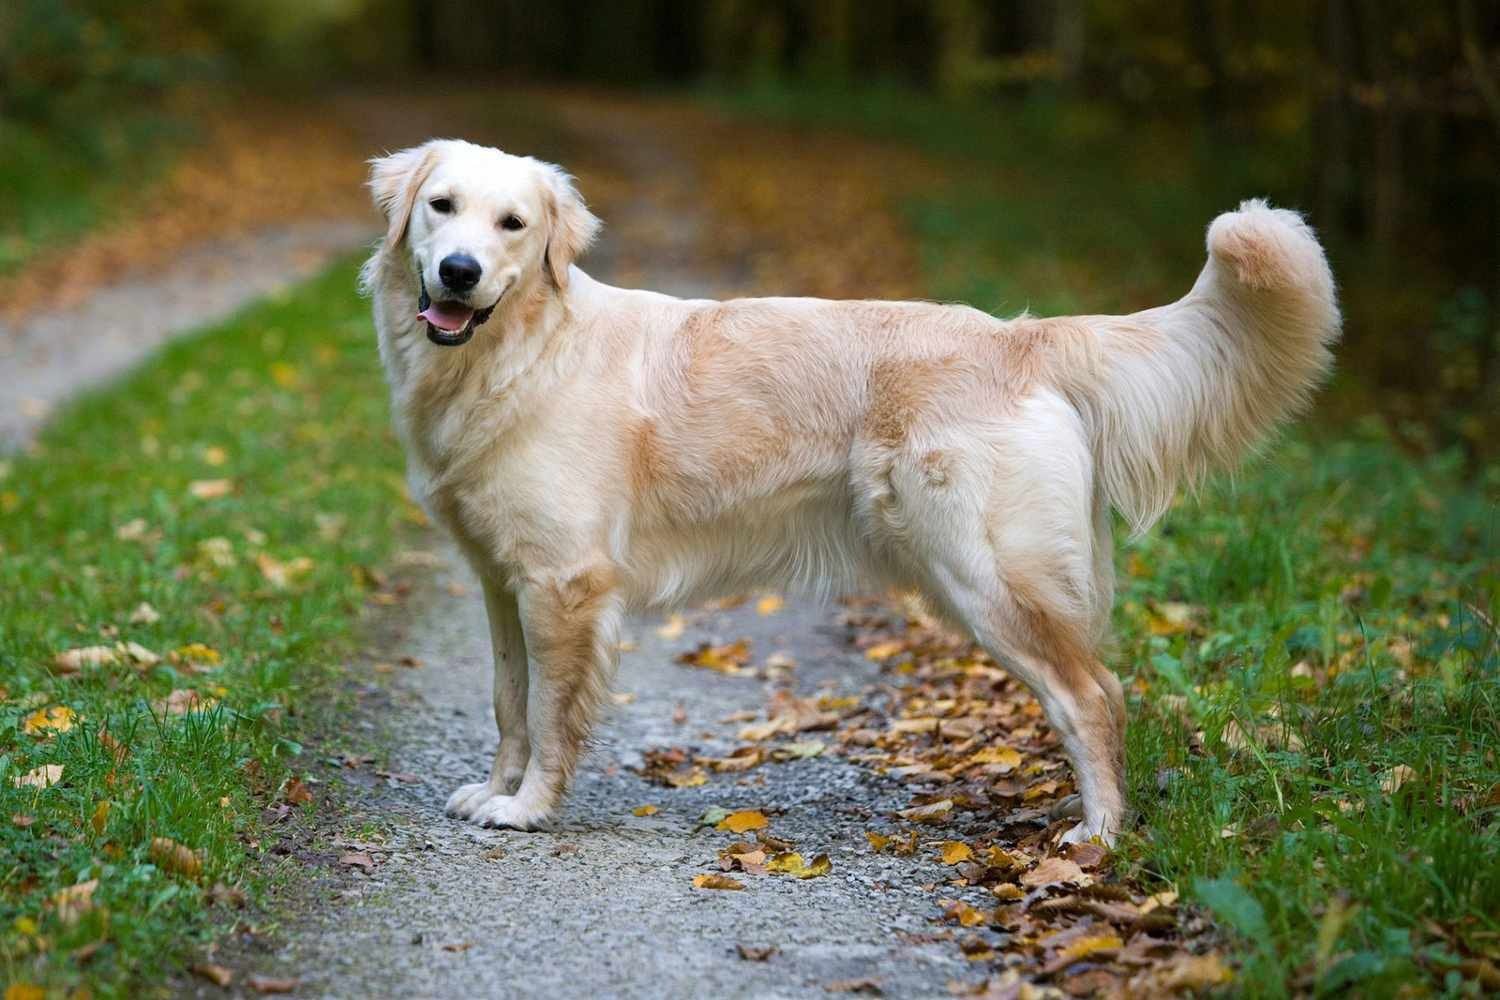 Dog Breeds Compatible with Cats: Golden Retrievers